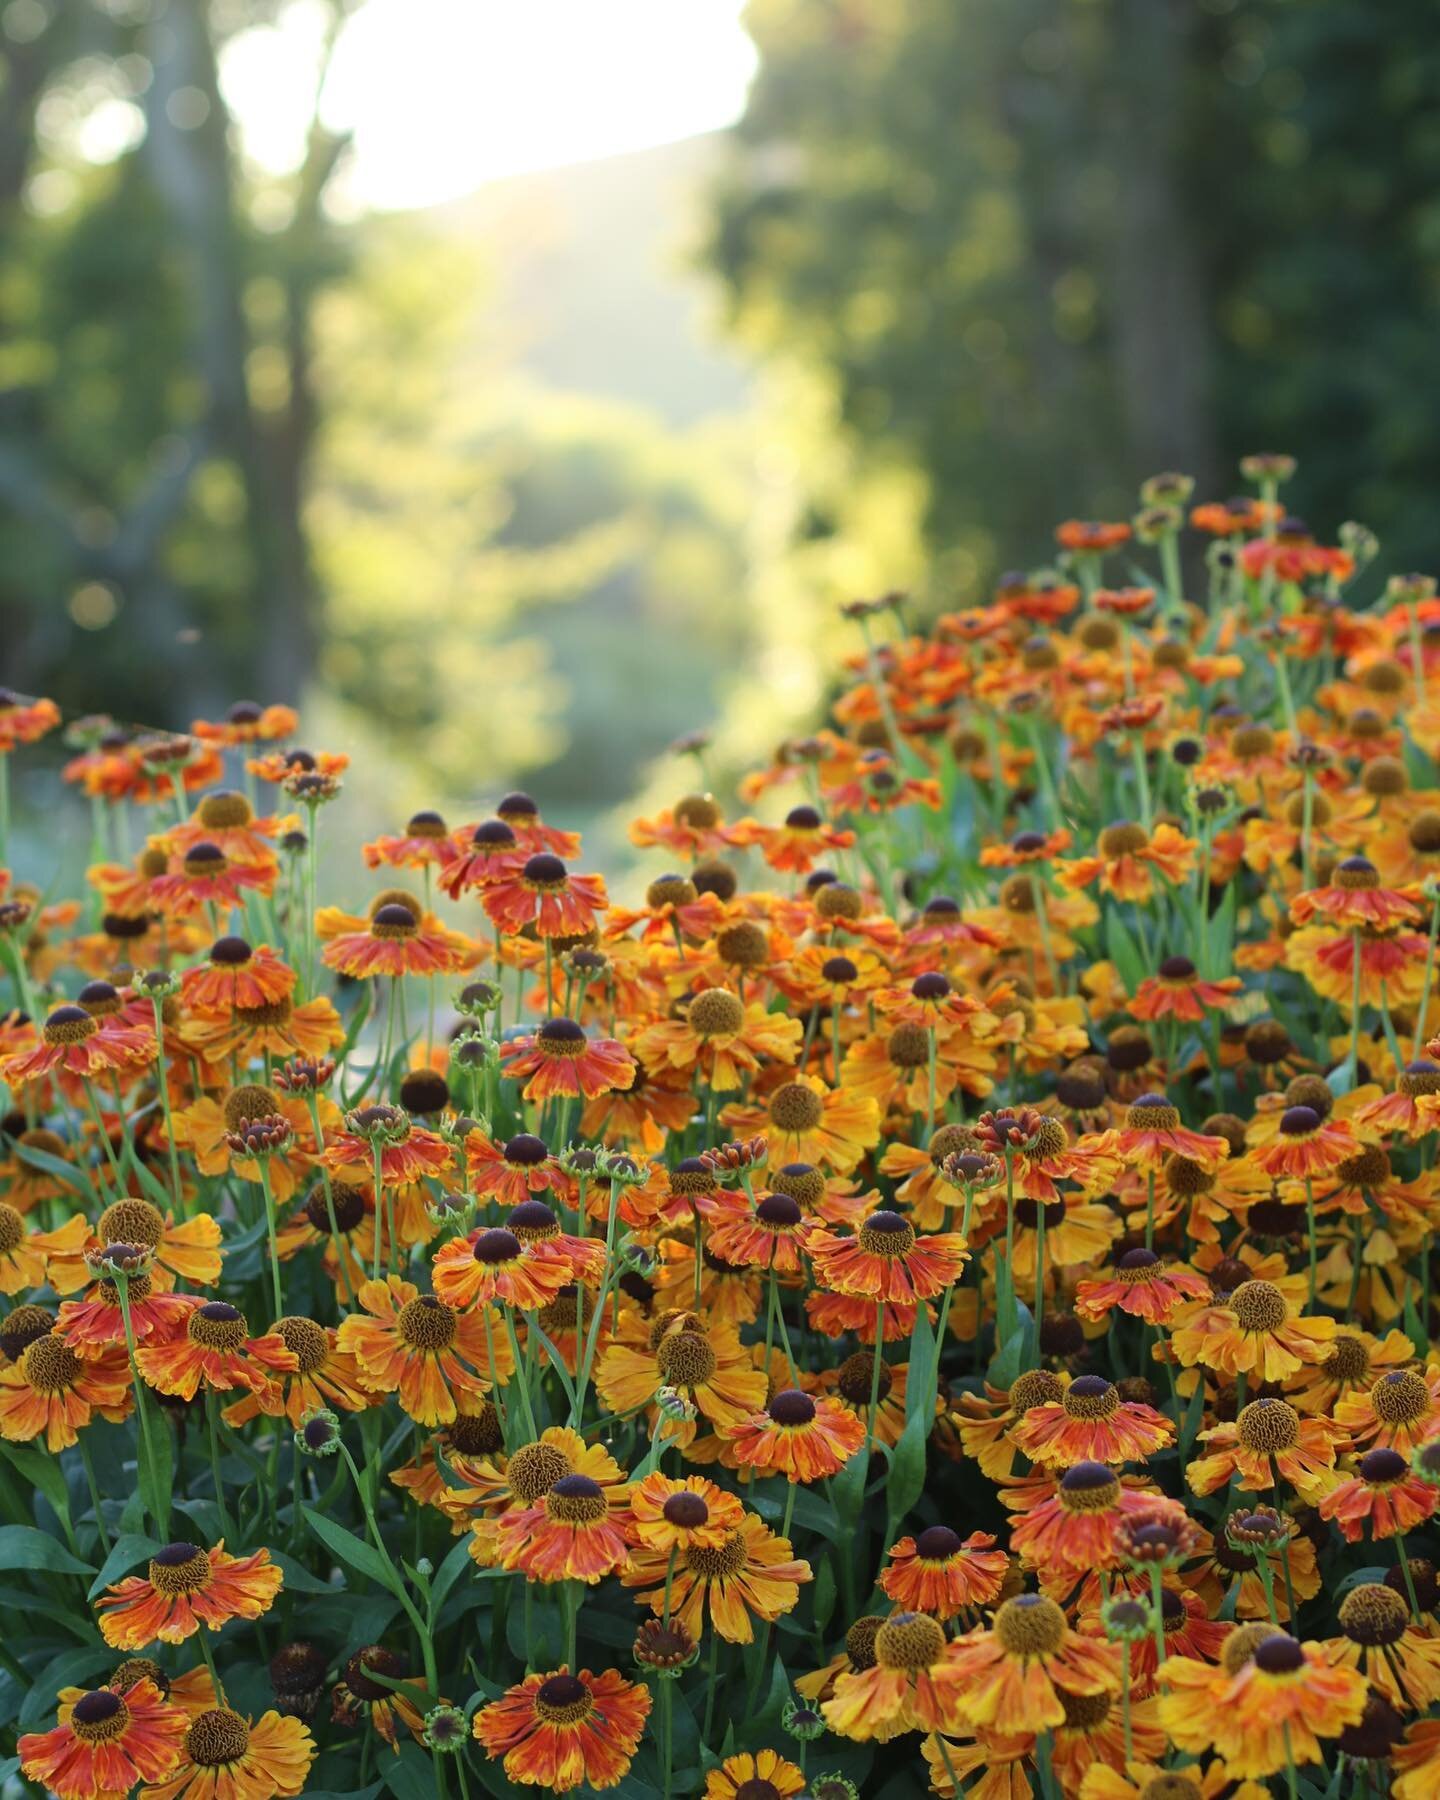 All the love for the helenium right now. They&rsquo;ve been my little globes of sunshine through a very grey wet summer season, when we forgot what the sun even was. It feels glorious seeing the sun rise over the flowers today. Maybe we will see a sn